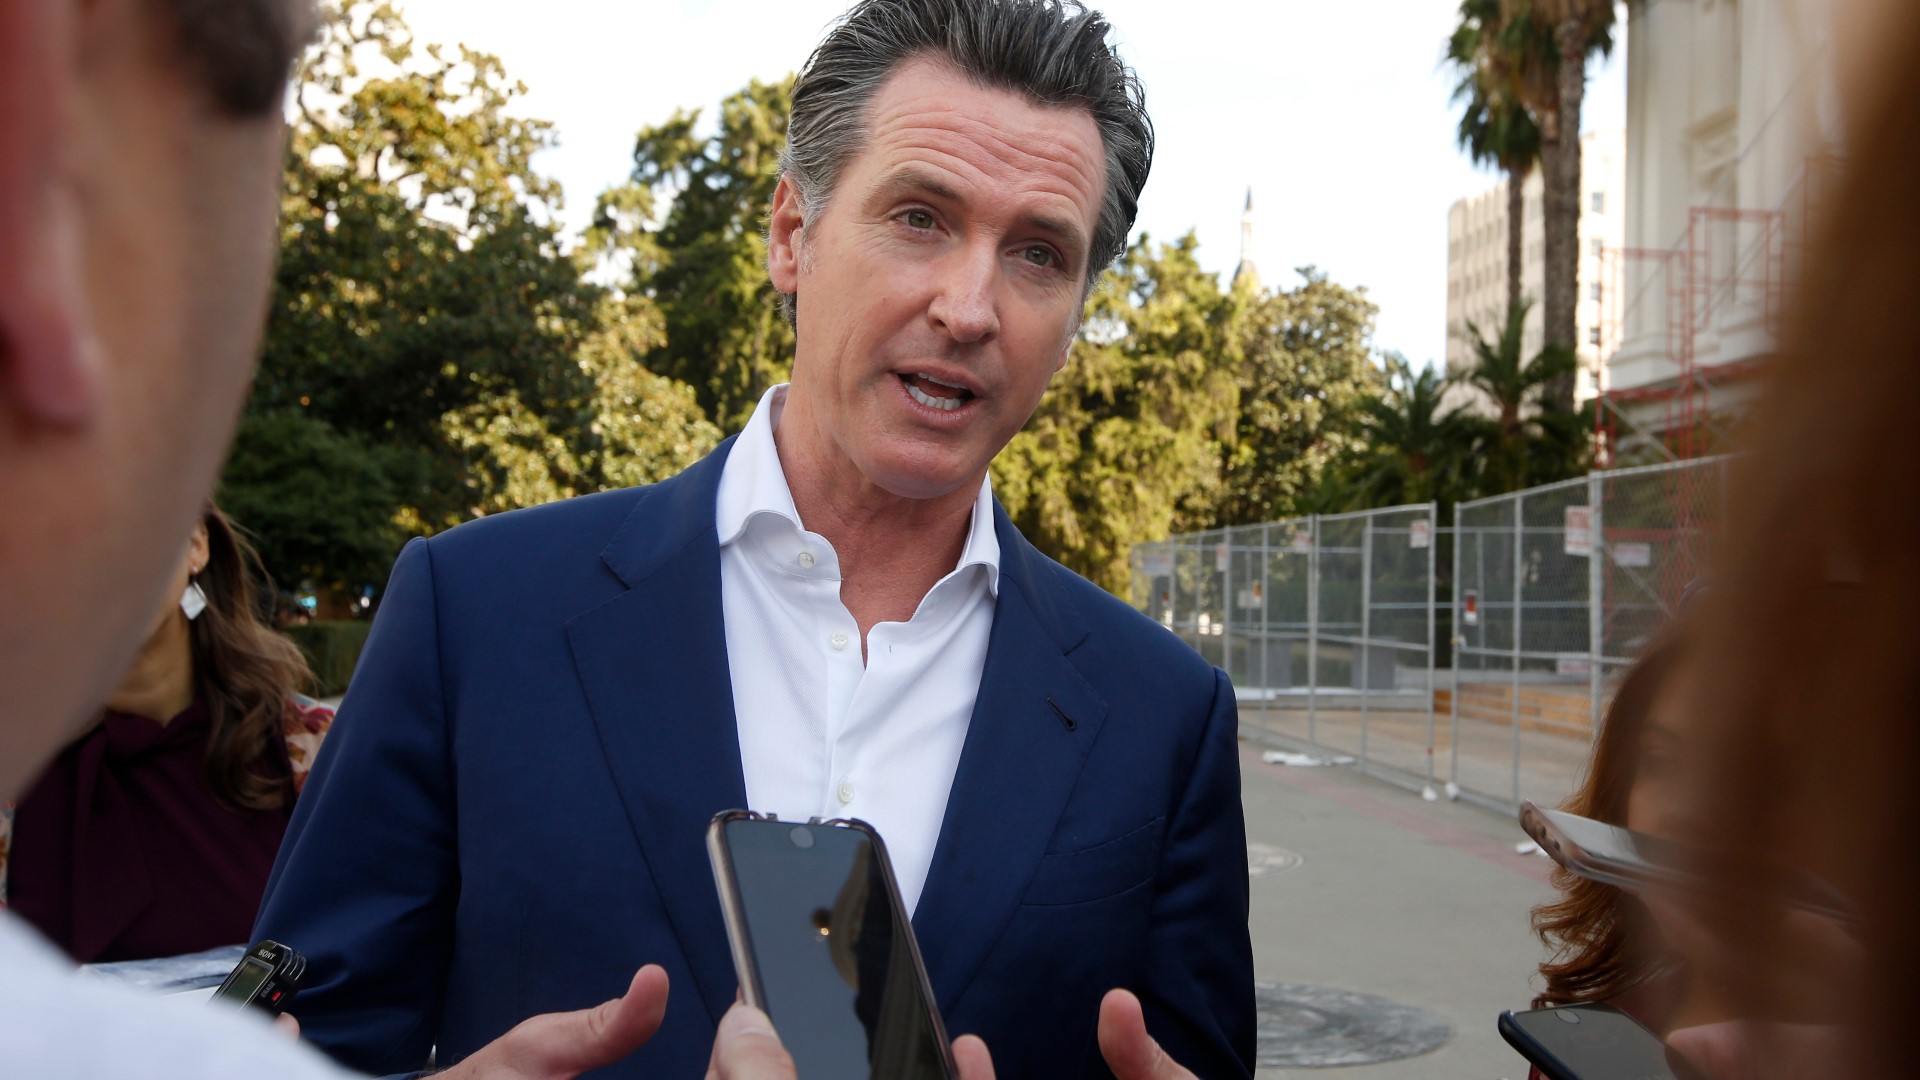 While two recall efforts may sound like a serious threat, California’s political history indicates that Gov. Newsom has little reason to worry - at least for now.